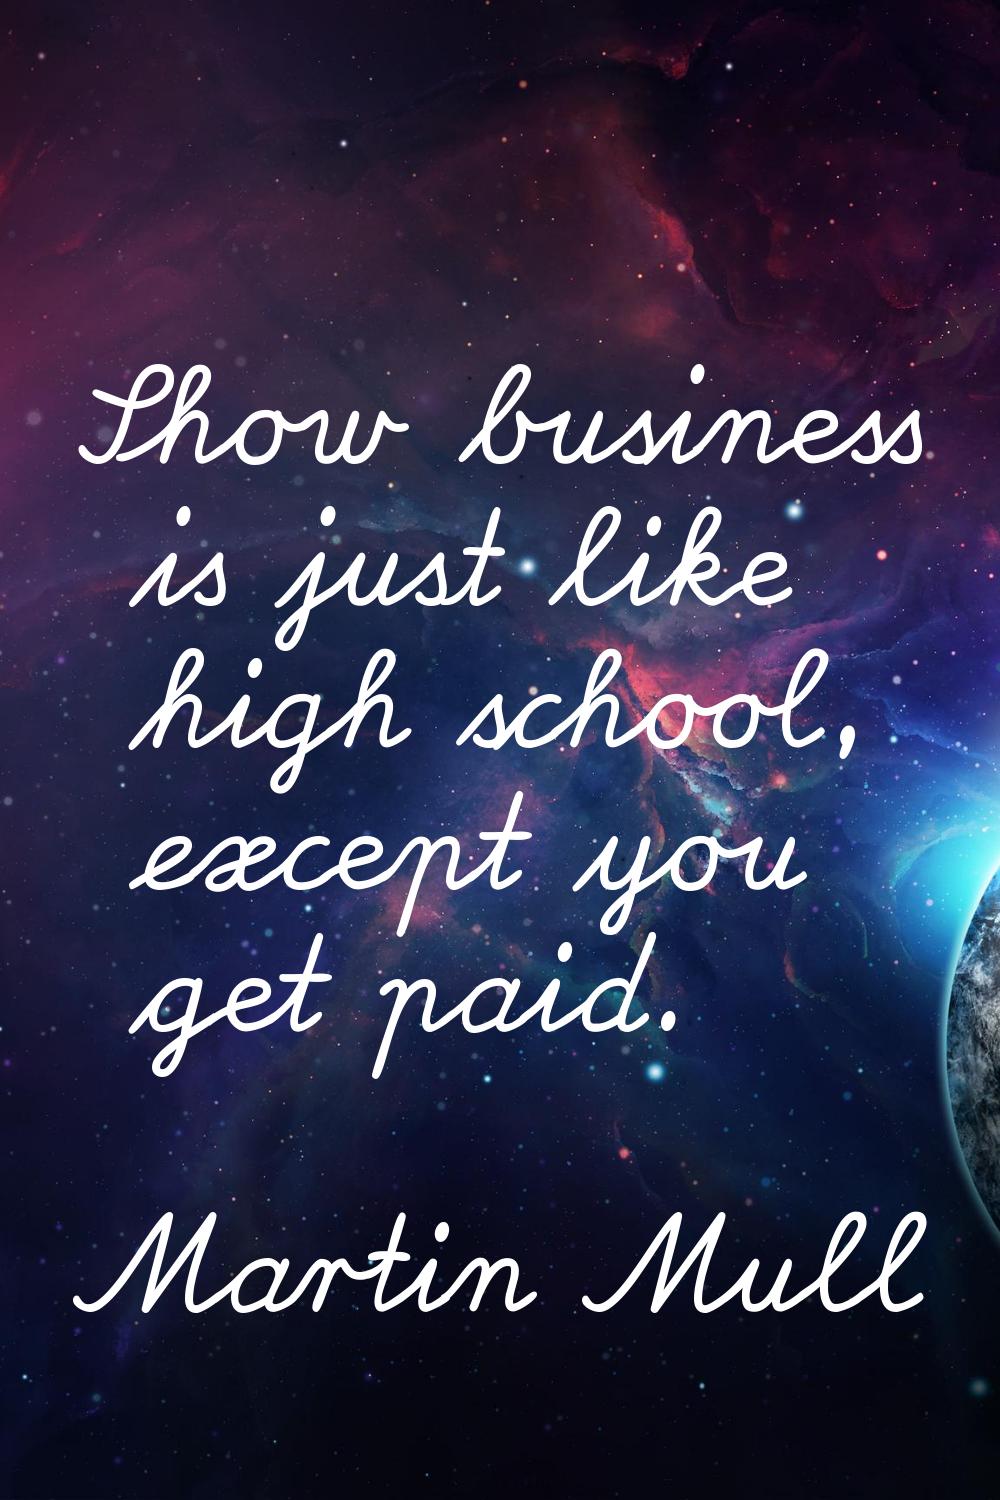 Show business is just like high school, except you get paid.